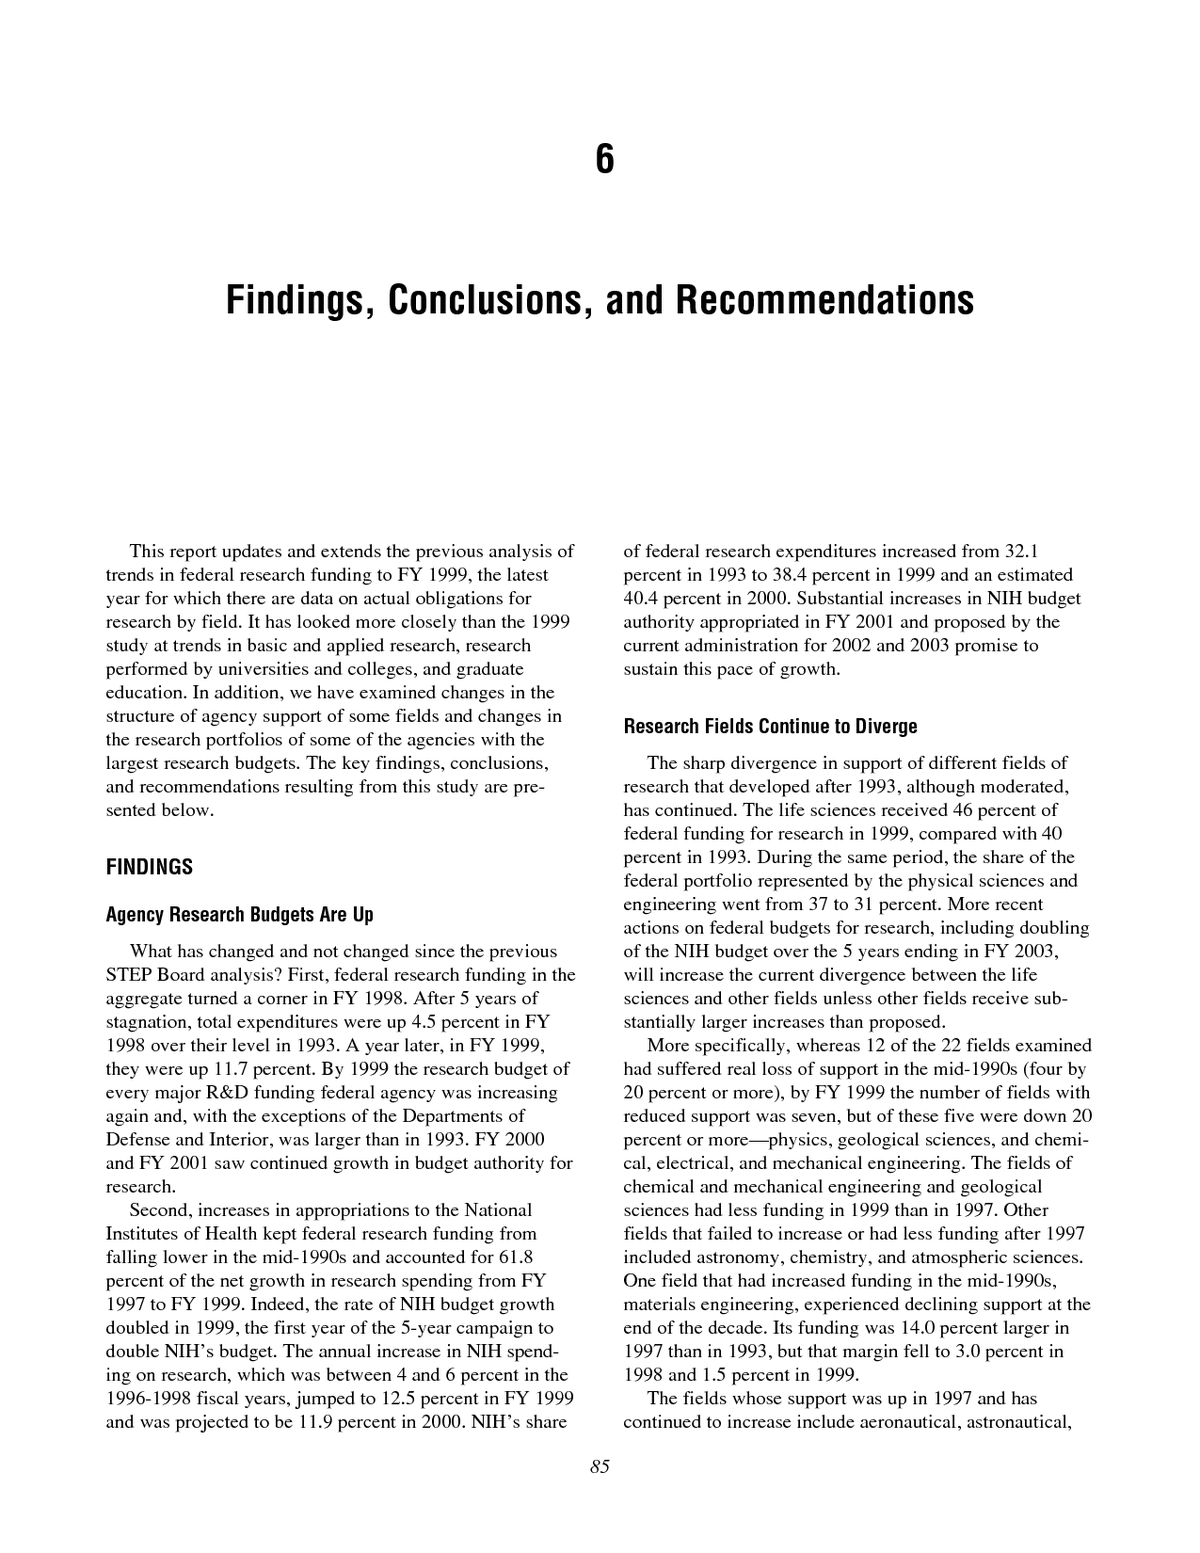 research findings conclusion and recommendation